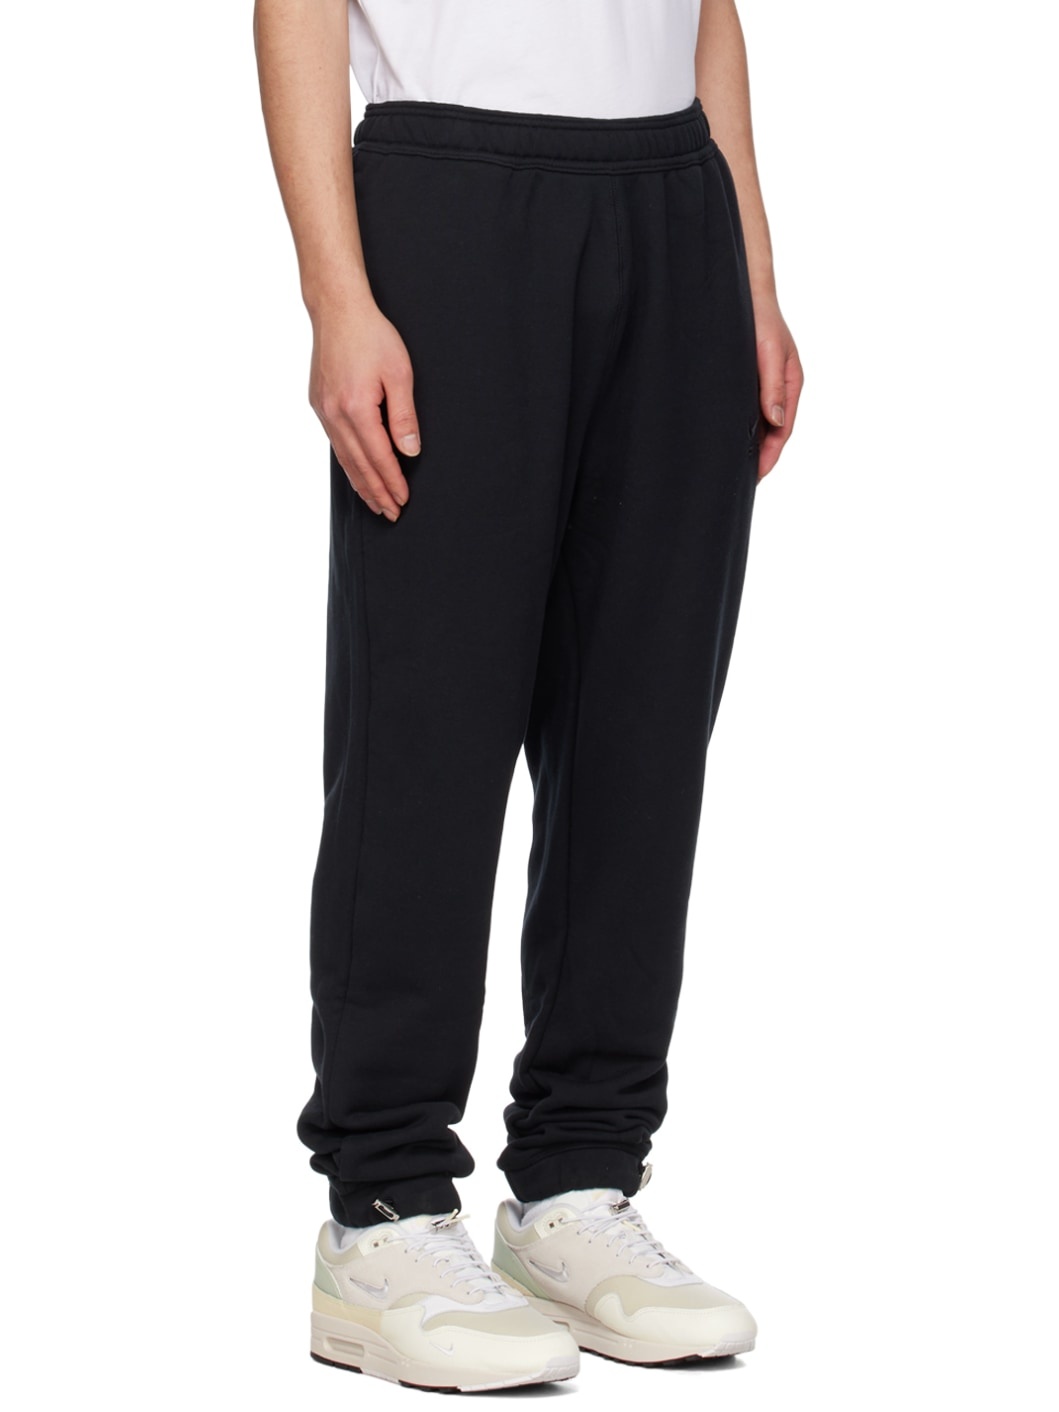 Black Embroidered Lounge Pants - 2